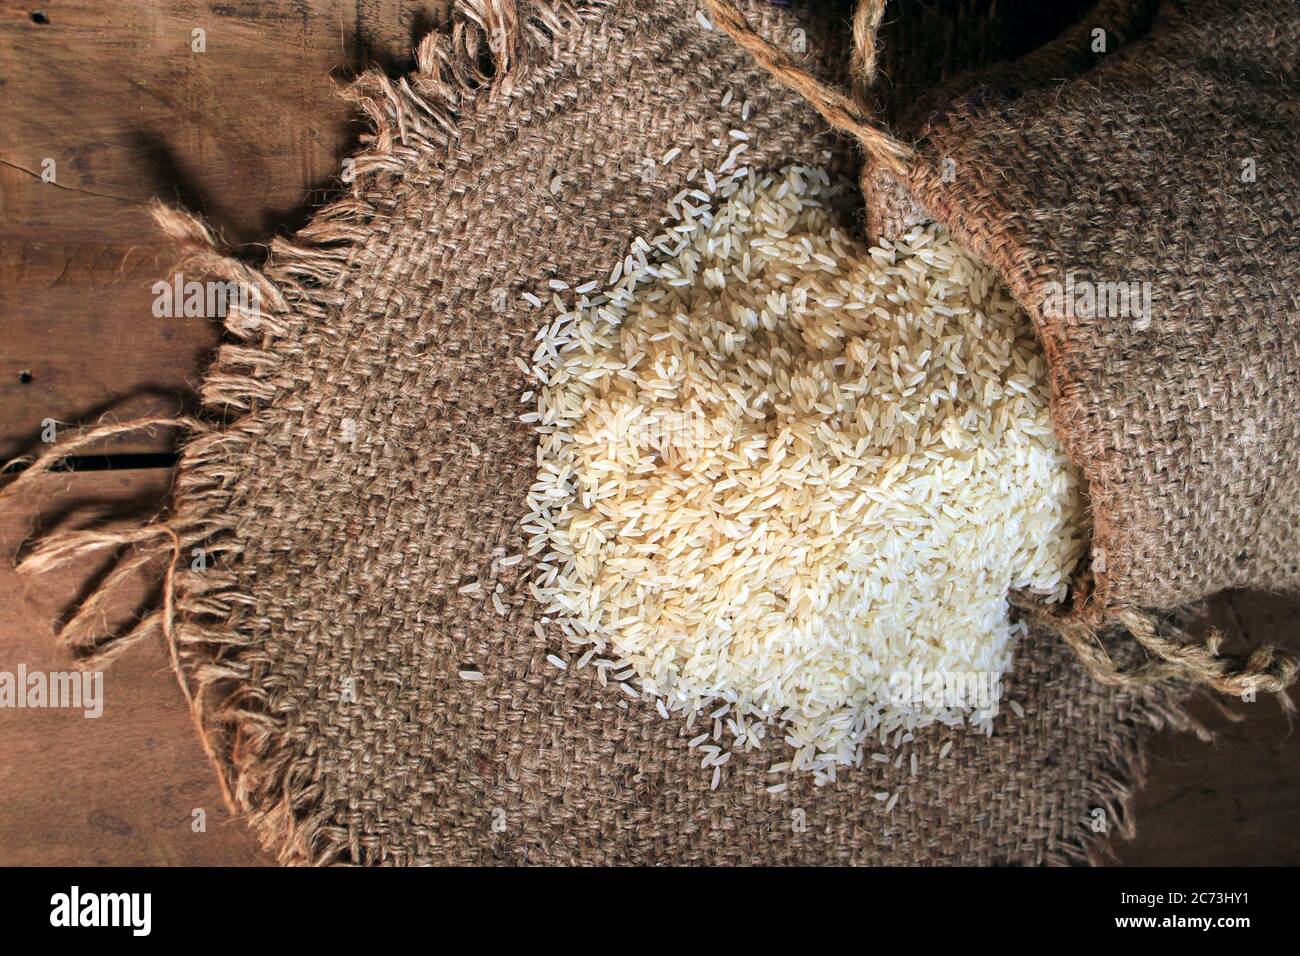 Rice out from small sack isolated on wooden background. Fresh rice in sack bag over wooden textured background. Close up raw rice grain on sack cloth. Stock Photo